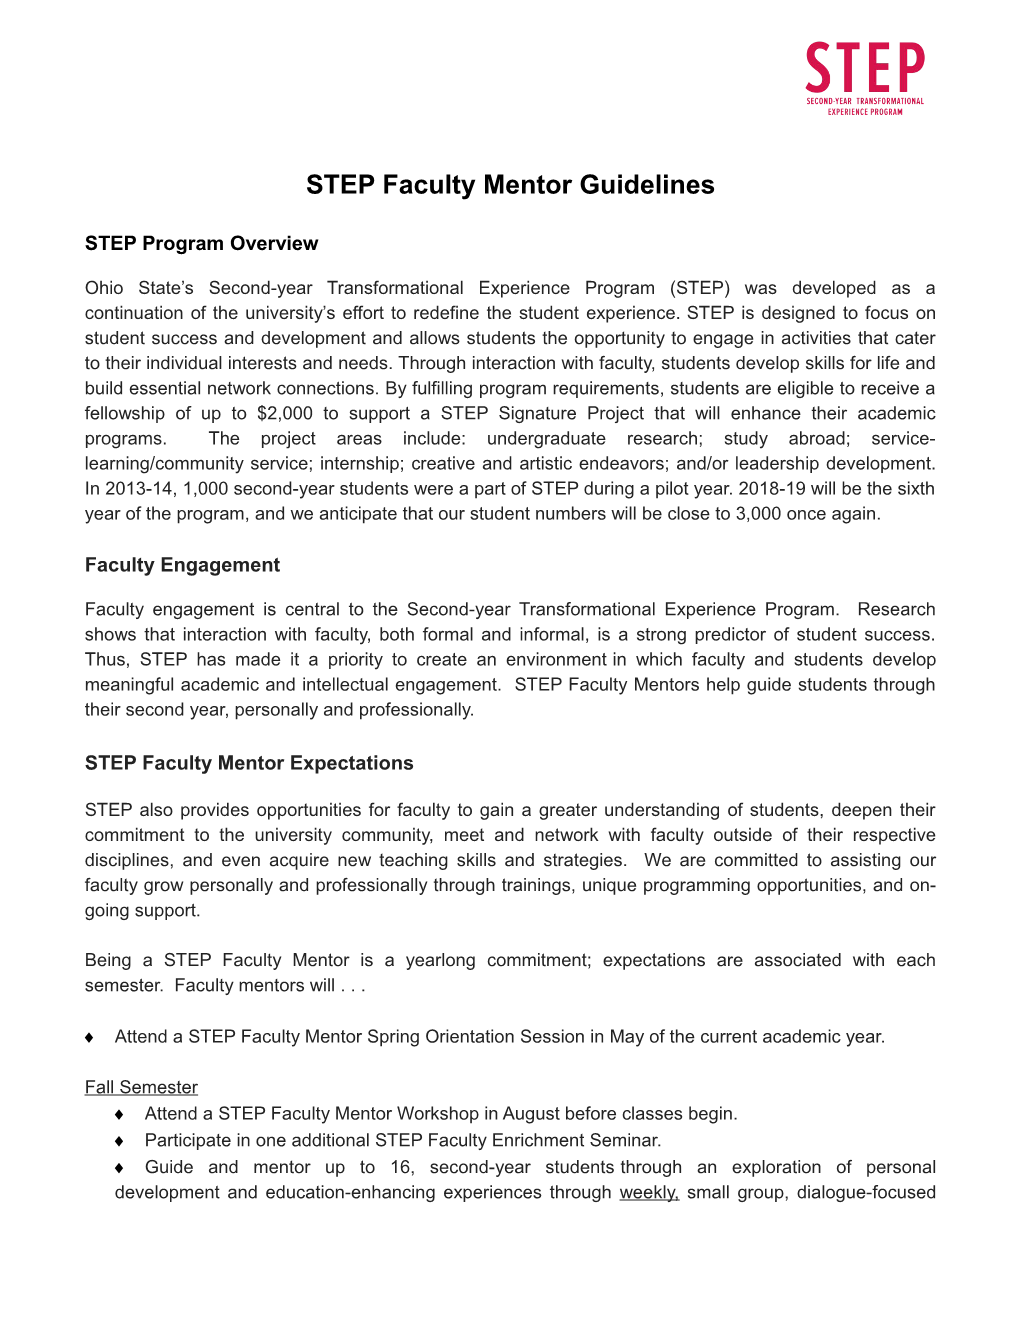 STEP Faculty Mentor Guidelines